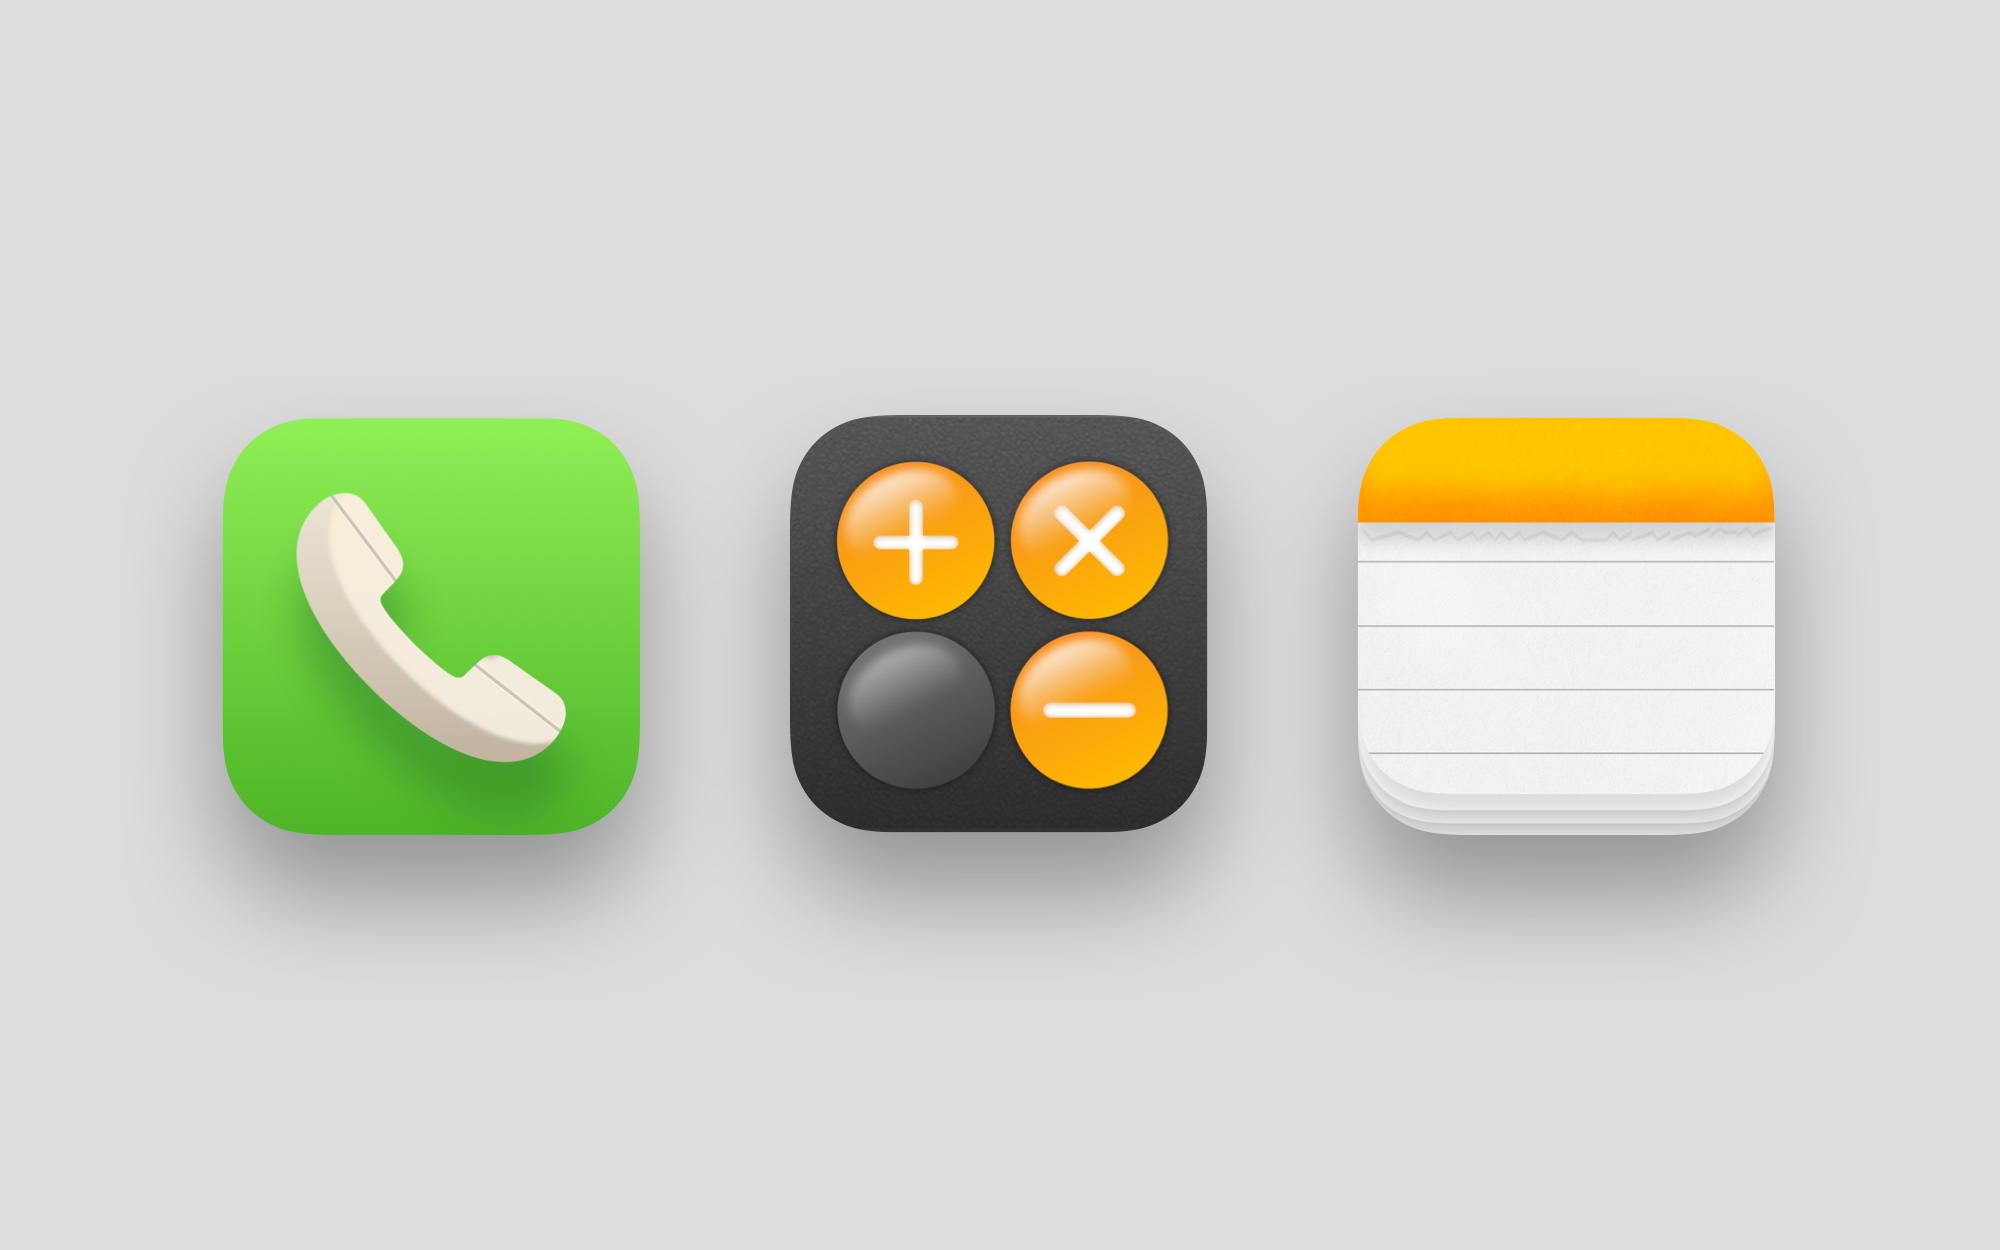 Image of phone, calculator and notes app icons from textured themes